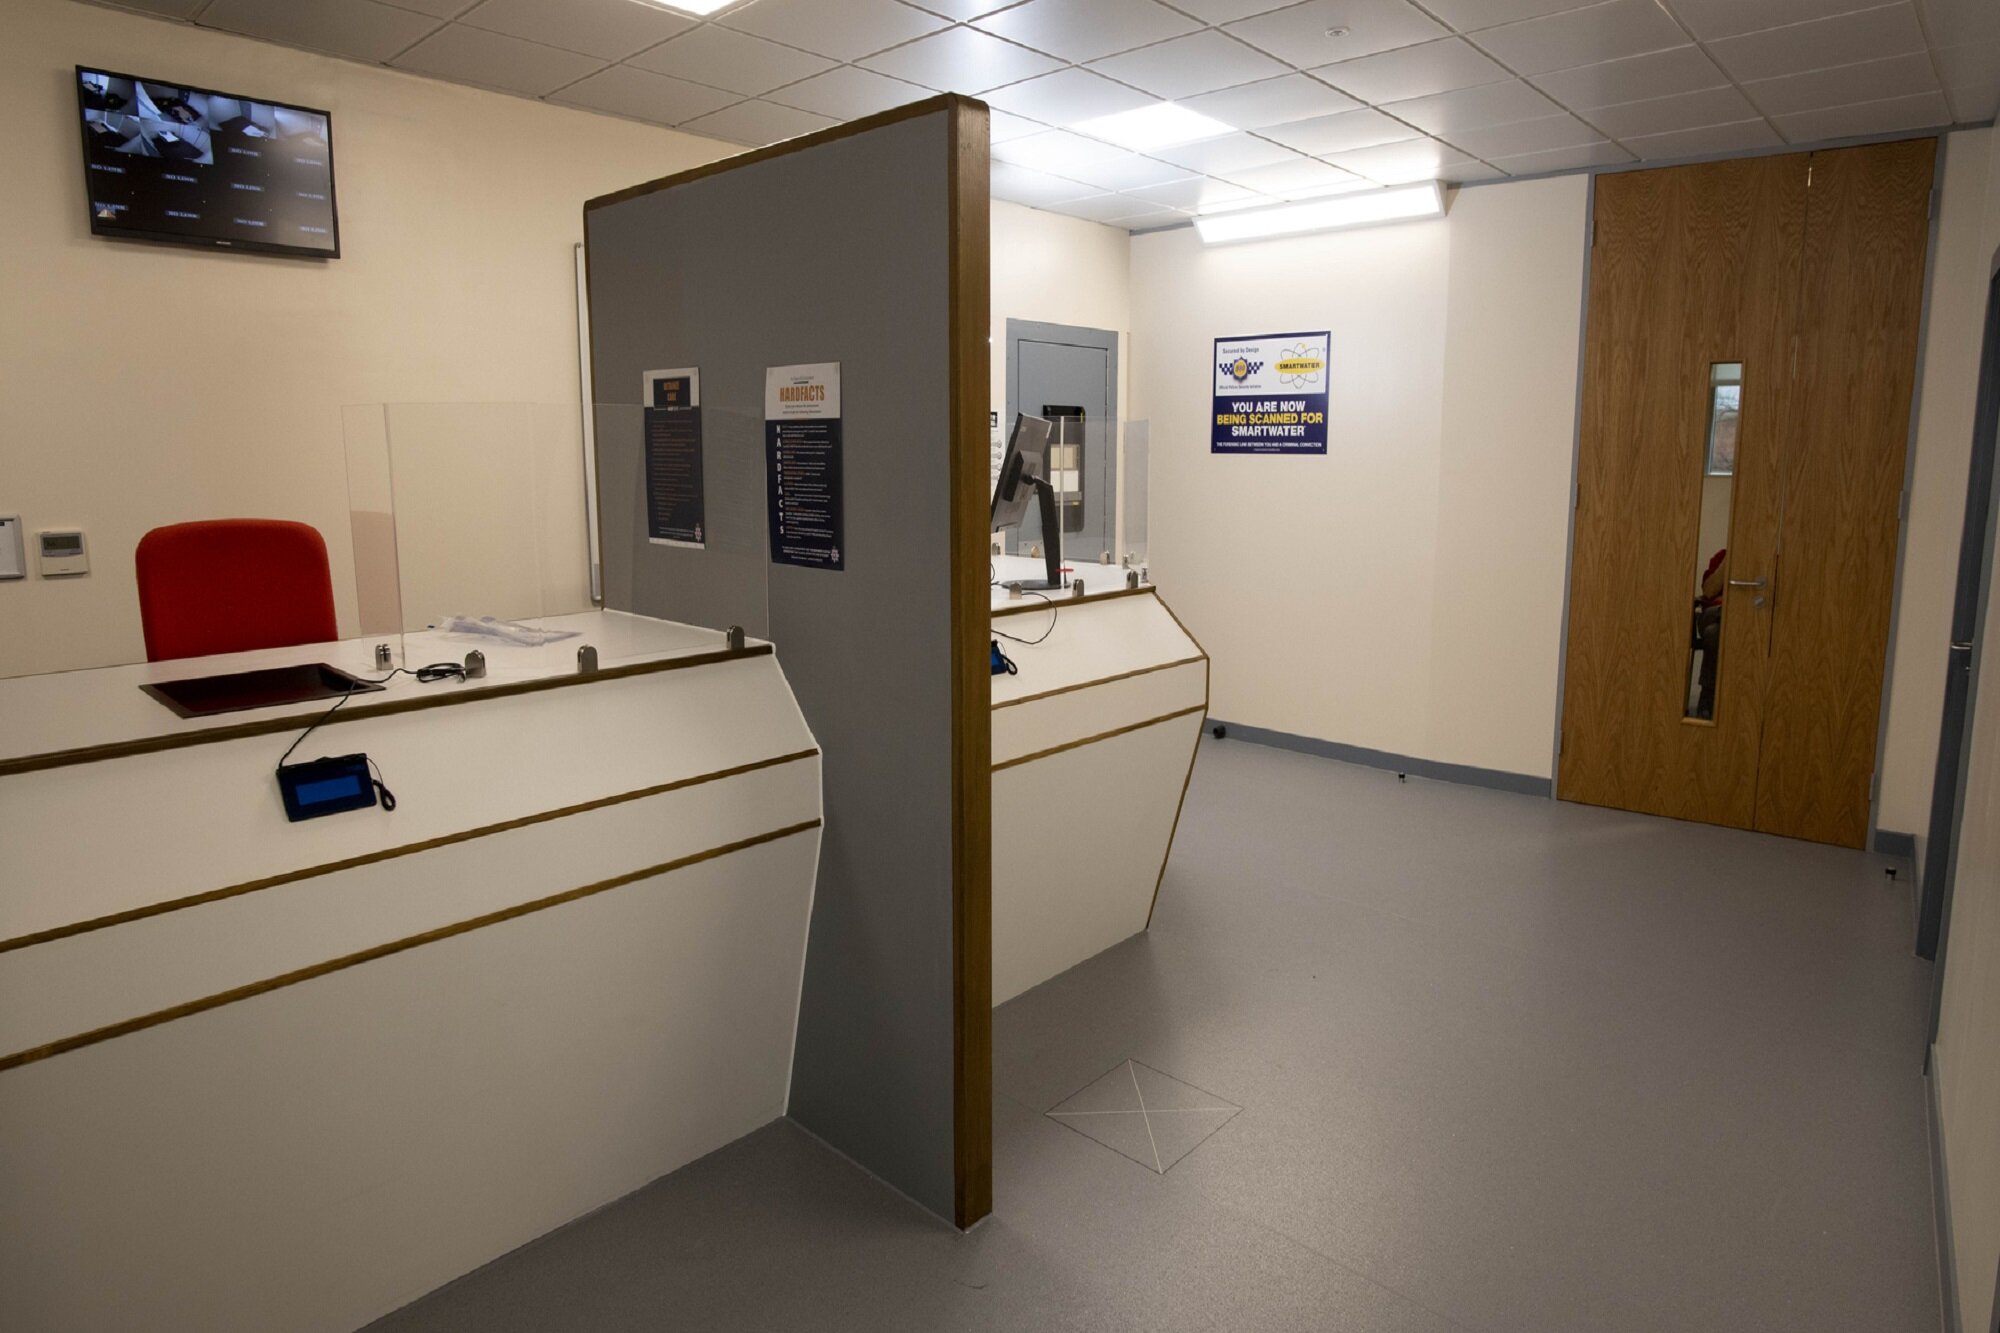 Police apprentices benefit from new custody suite